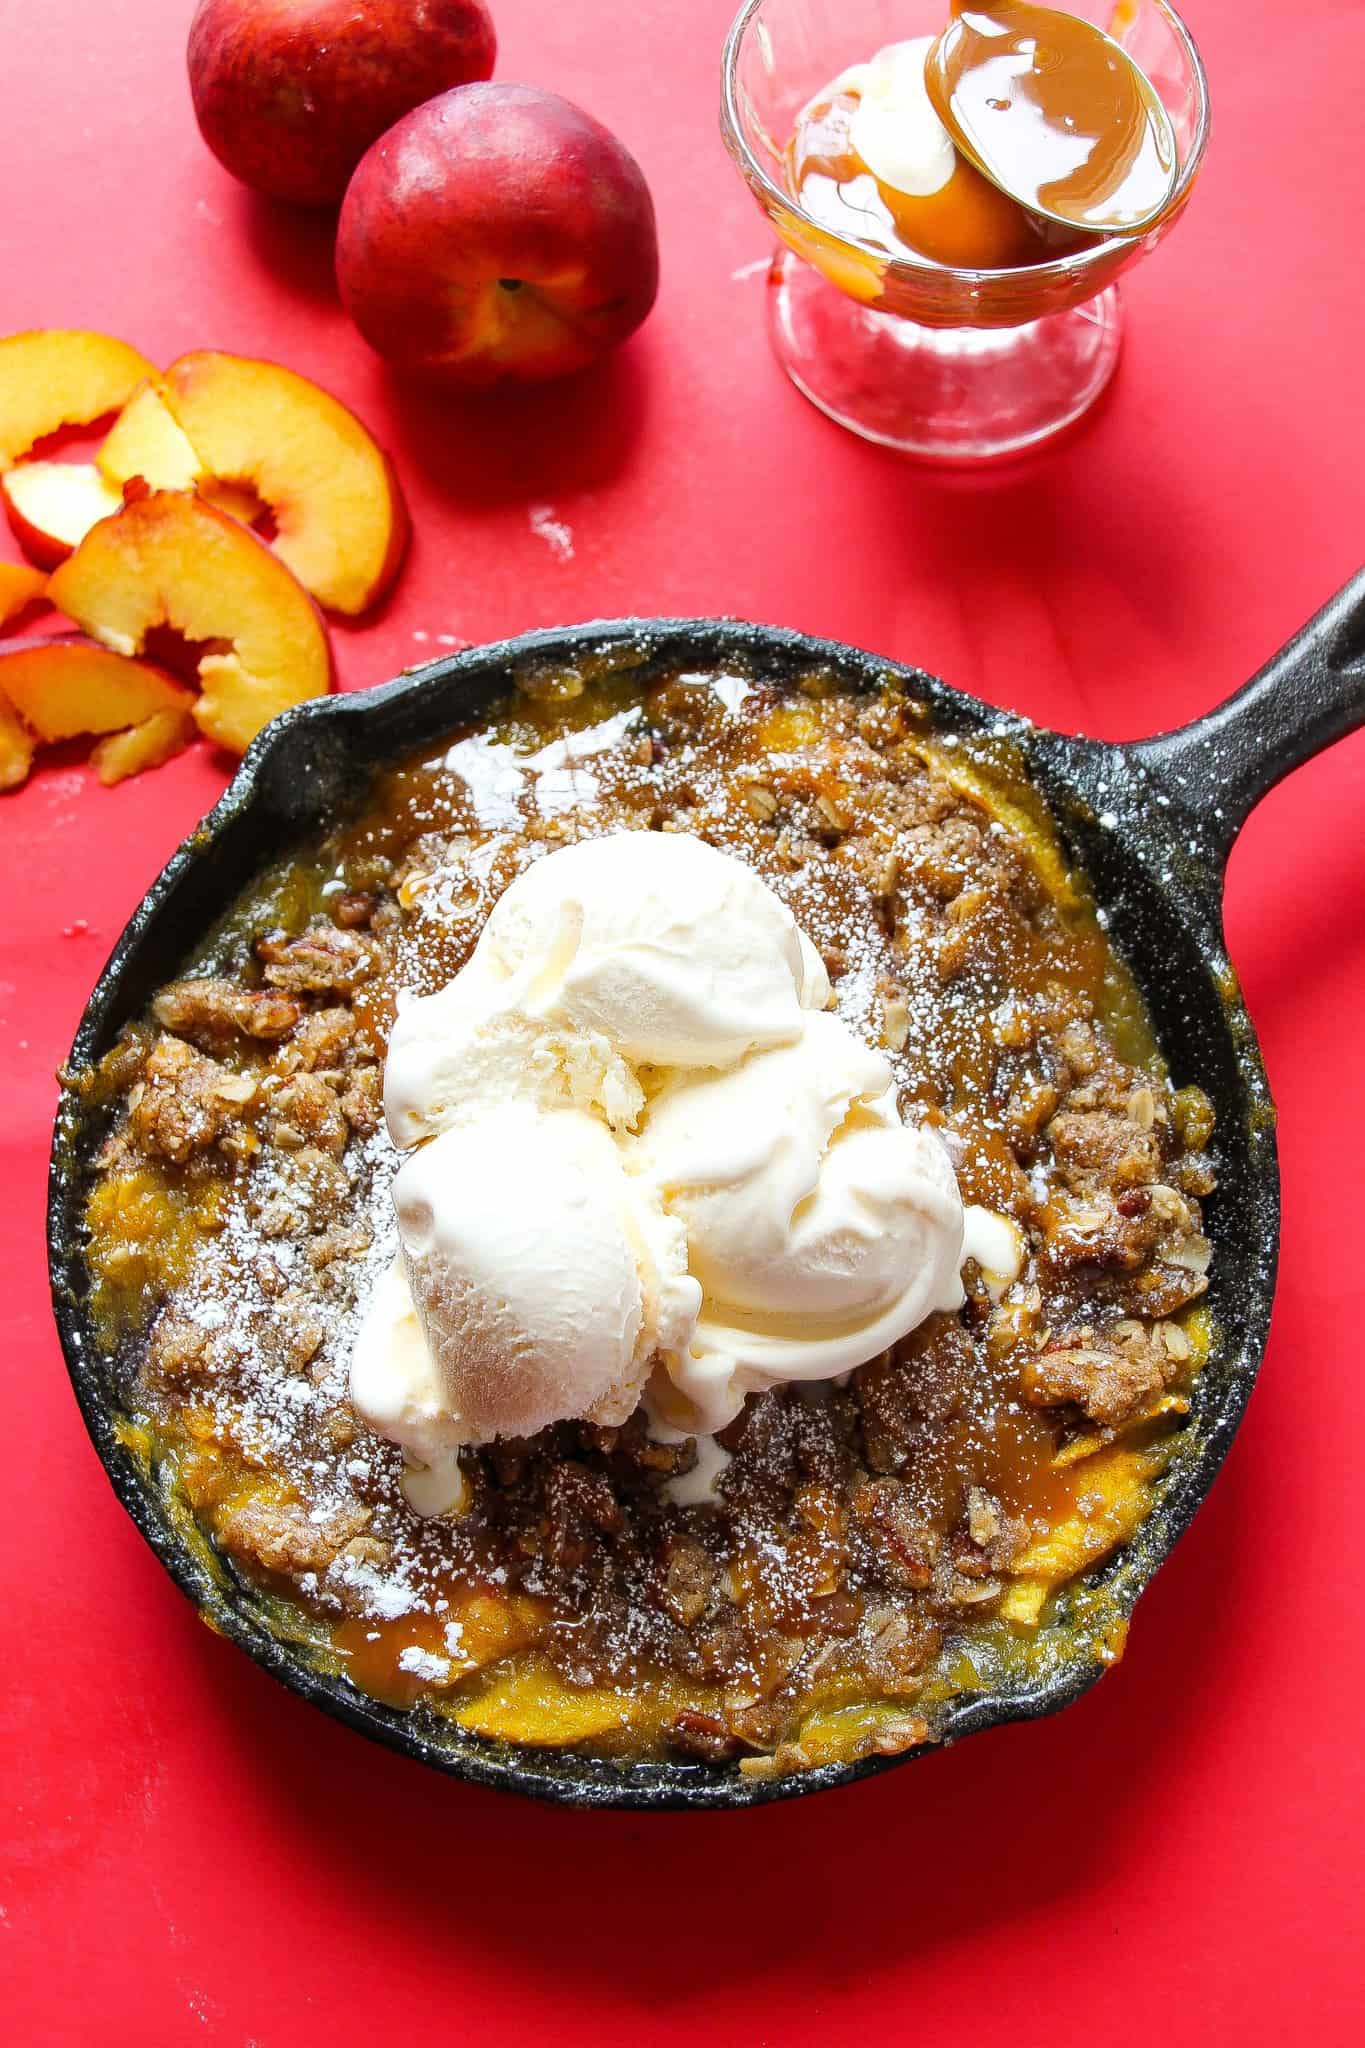 Peach crisp topped with ice cream and served warm